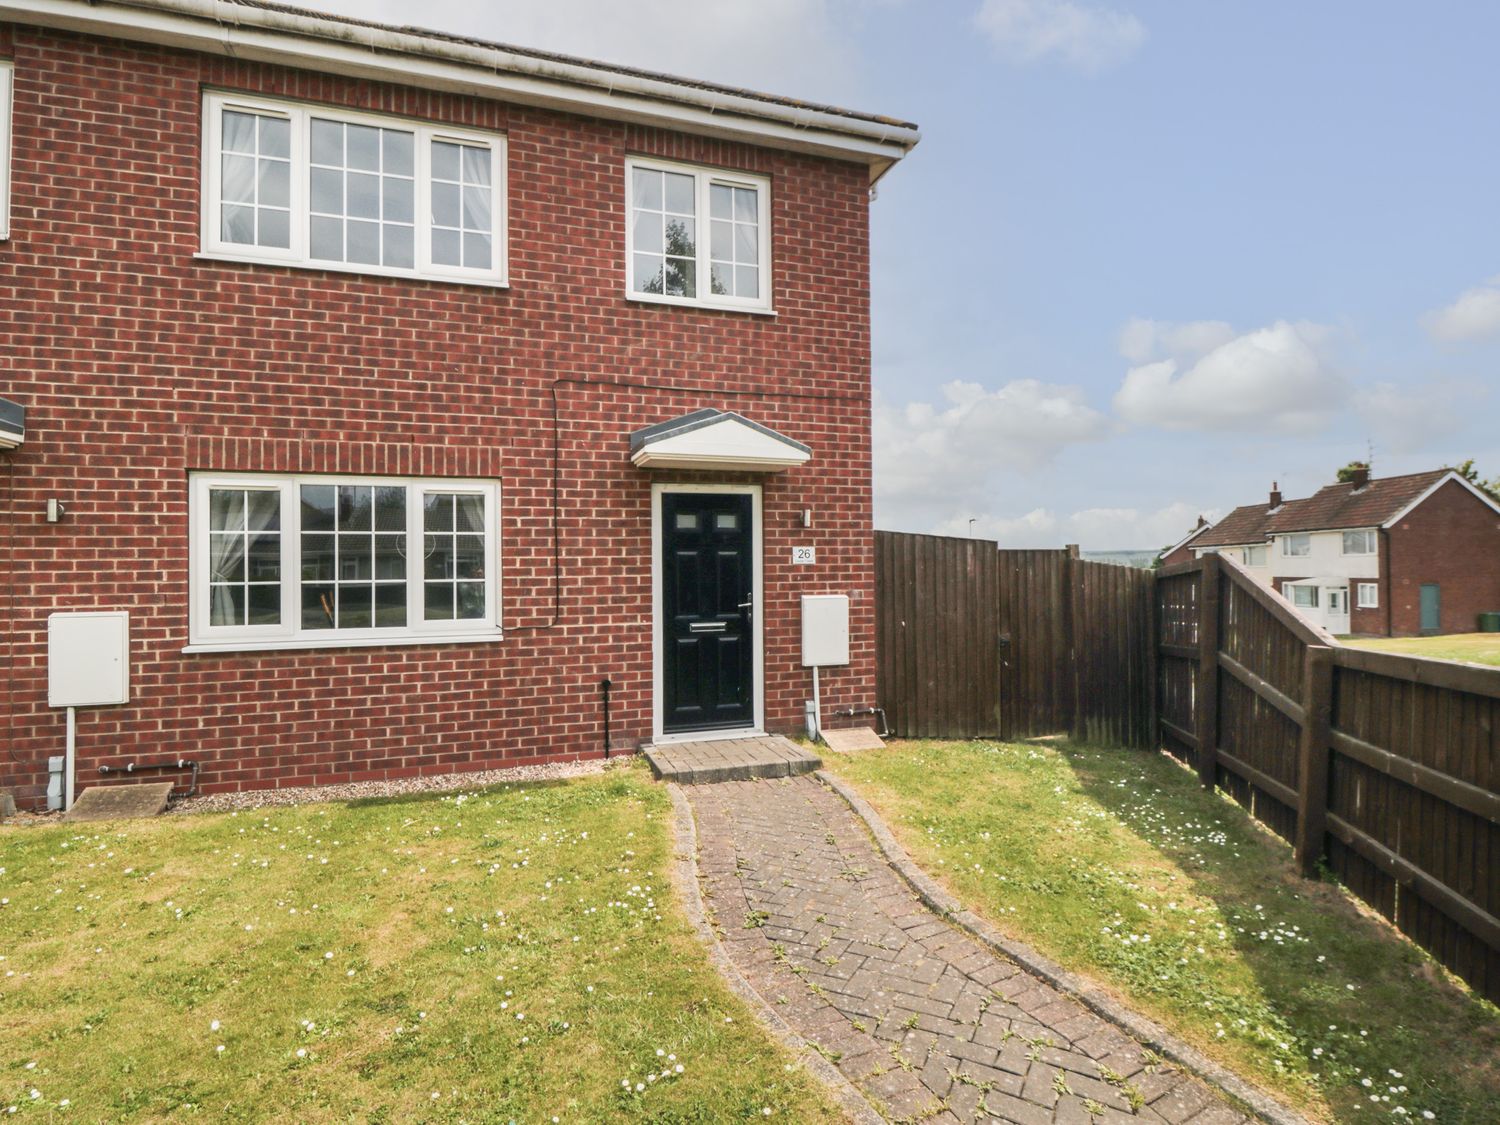 26 Eastway - North Yorkshire (incl. Whitby) - 992236 - photo 1